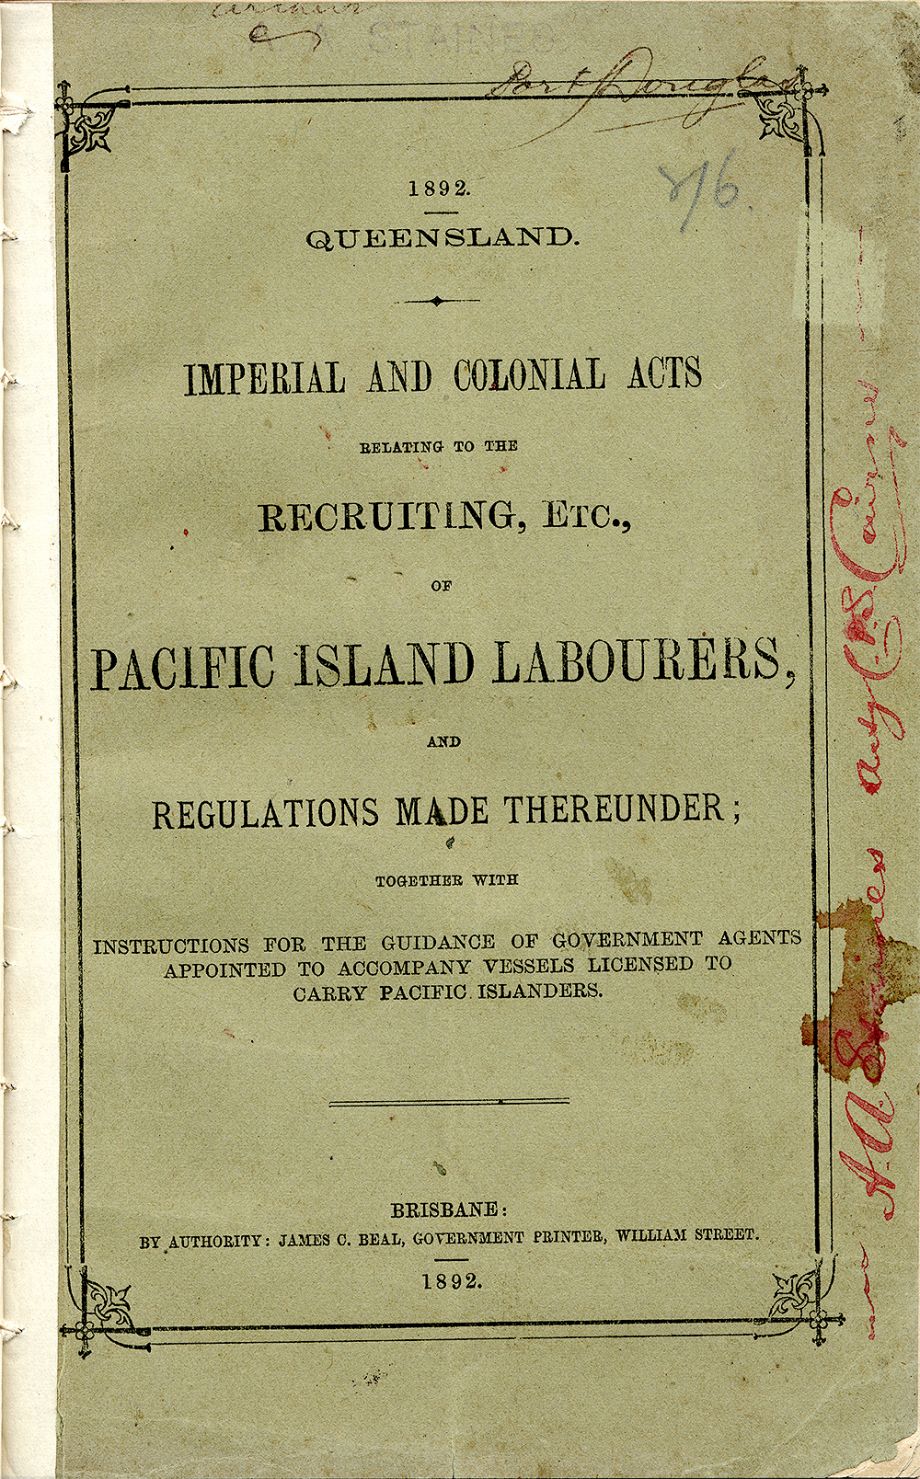 1892 Imperial and colonial Acts relating to the Recruiting, etc., of Pacific Island Labourers, and regulations made thereunder; together with instructions for the guidanceof Government Agents to accompany vessels to carry Pacific Islanders. 